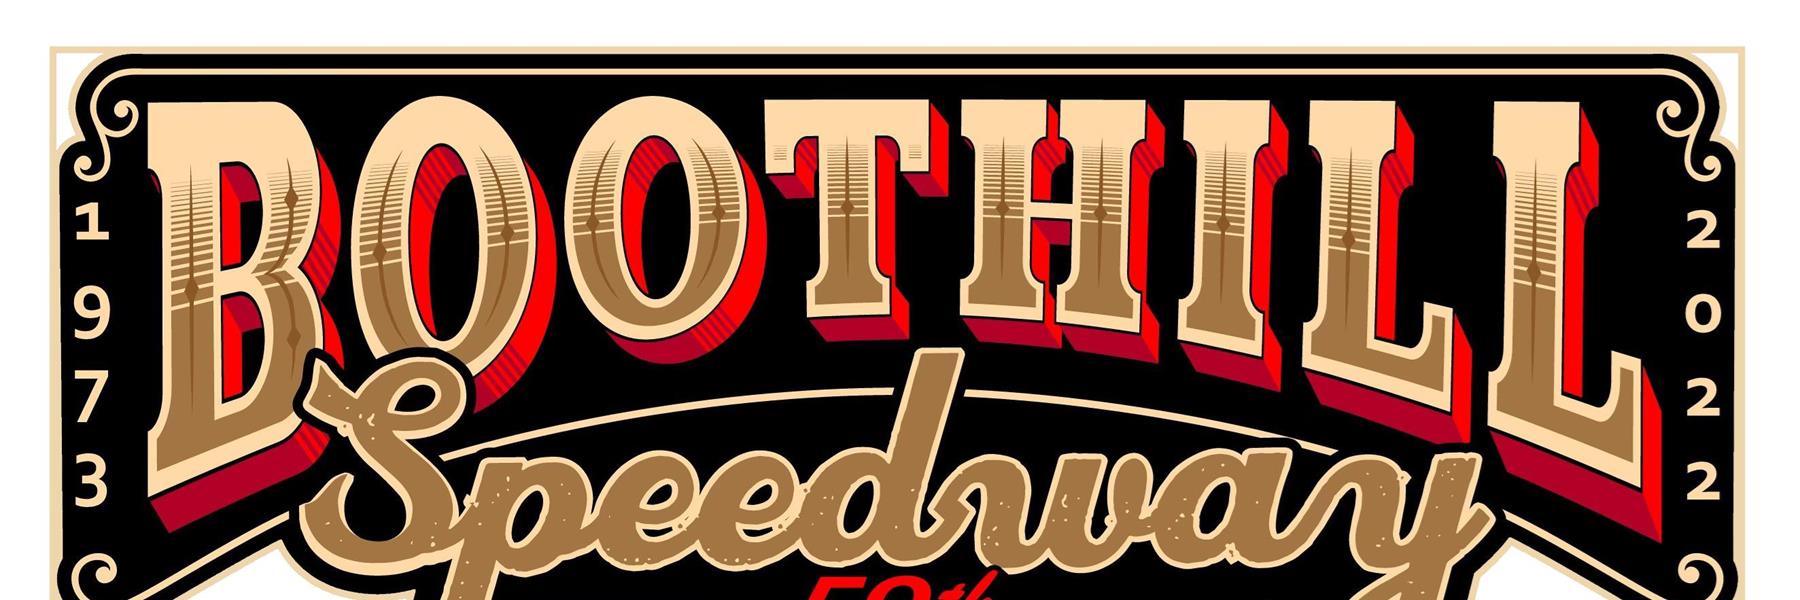 3/11/2023 - Boothill Speedway